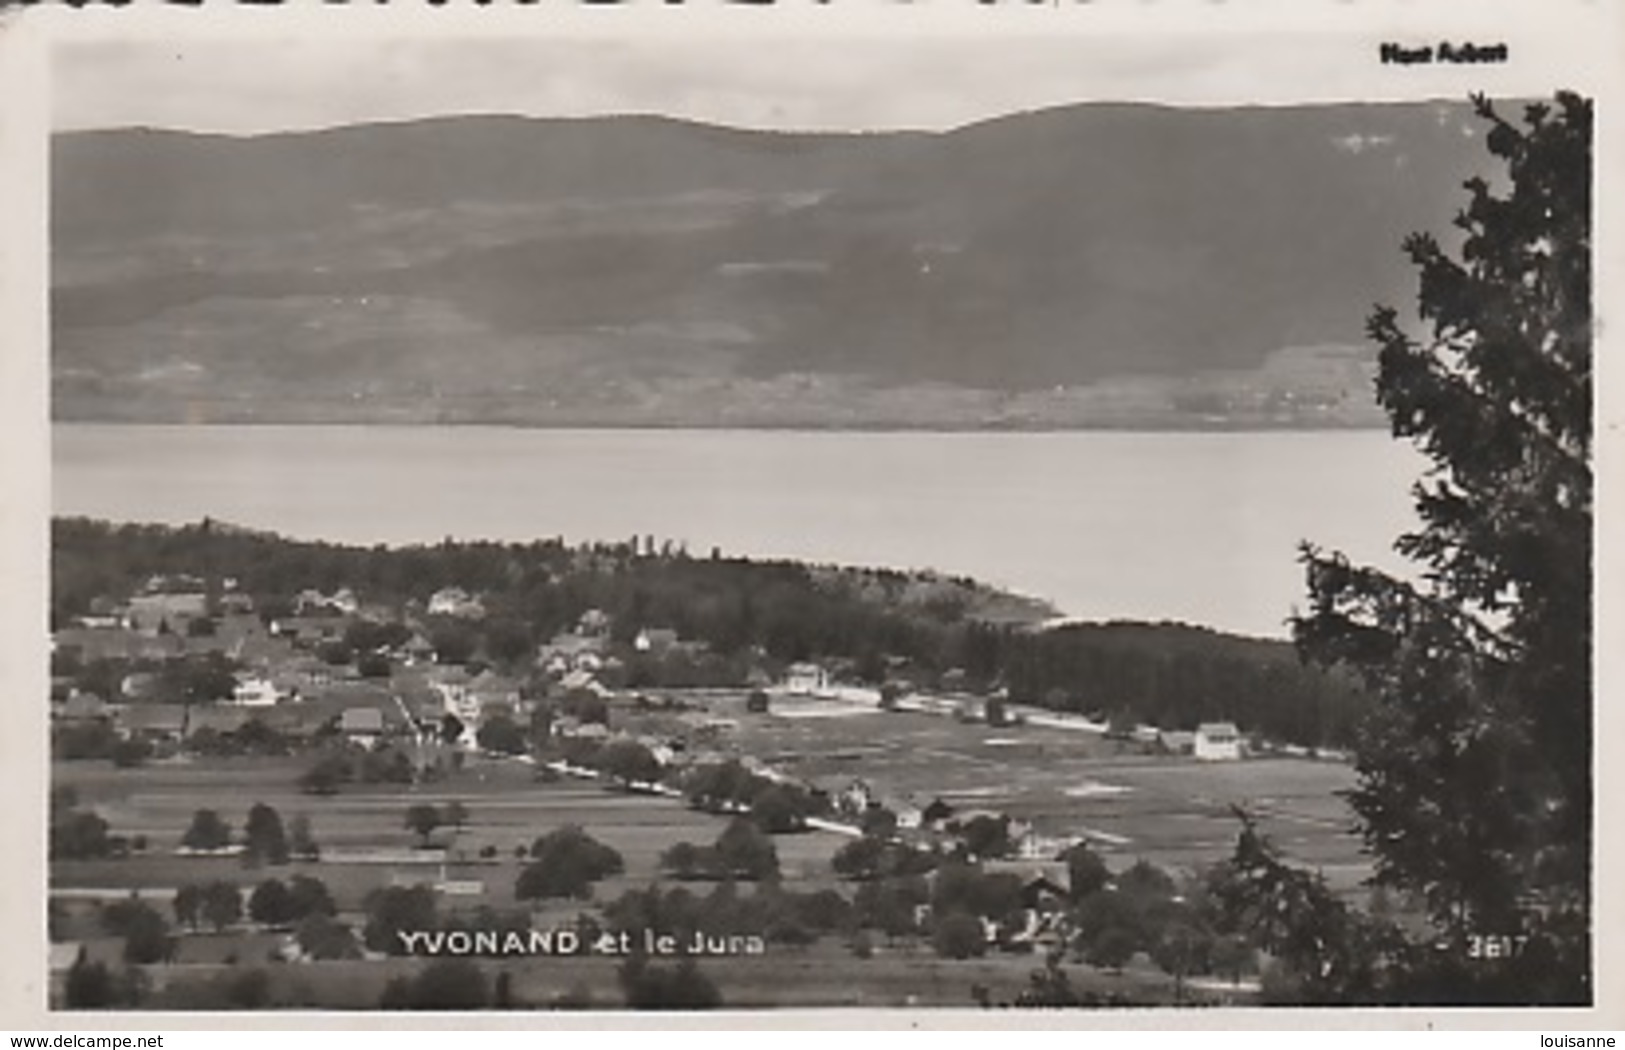 19. / 10 / 451  - YVONAND  ( VD )  ET  LE  JURA  - PANORAMA  - C P S M - Yvonand